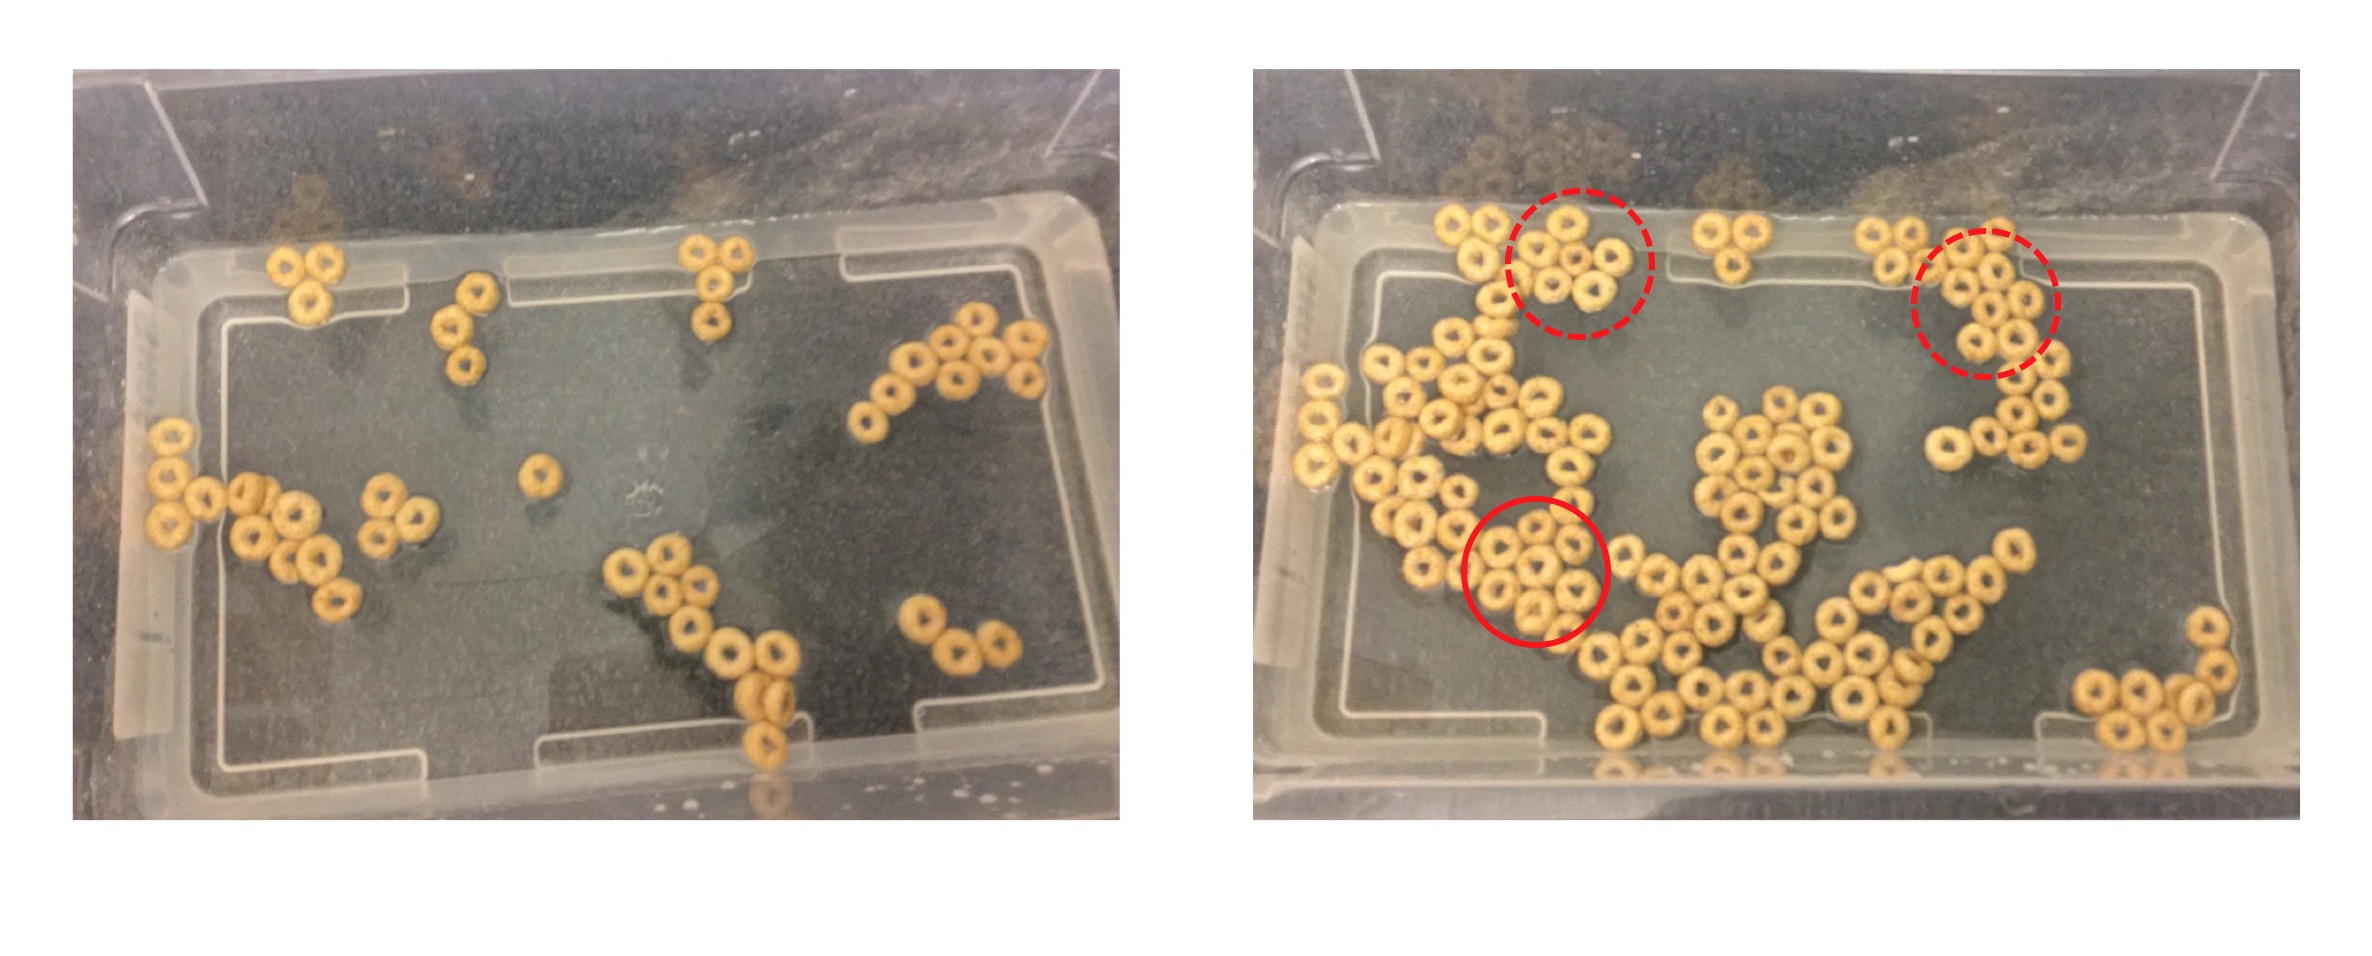 Cheerios floating in water illustrate one form of self-assembly. What do you notice about the areas circled in red? (Click to enlarge.)